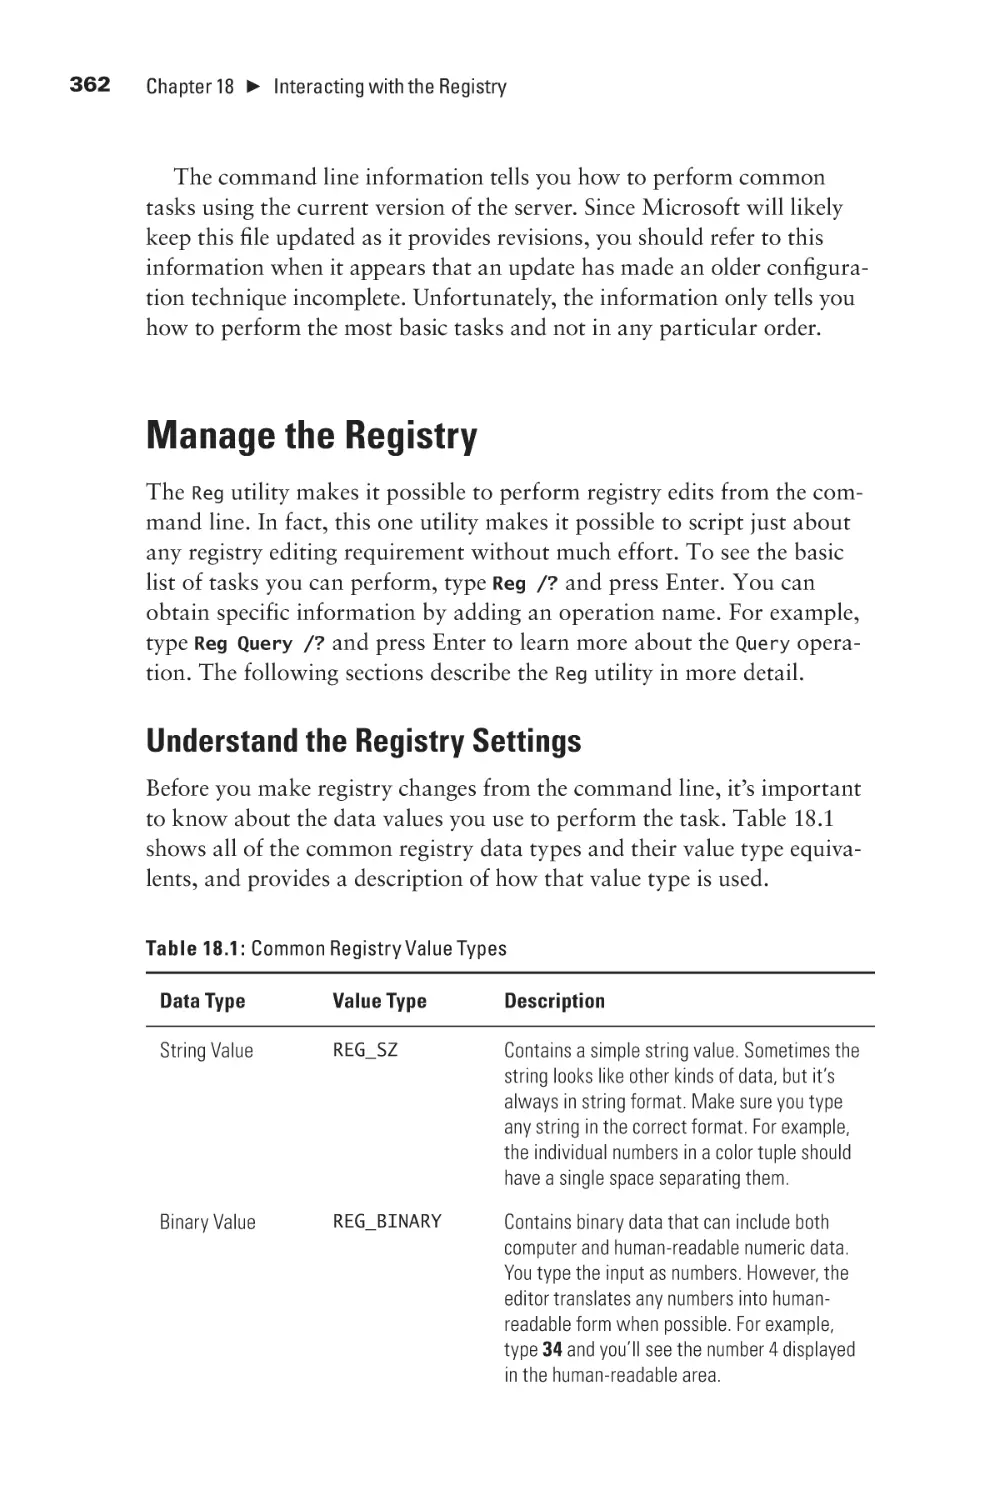 Manage the Registry